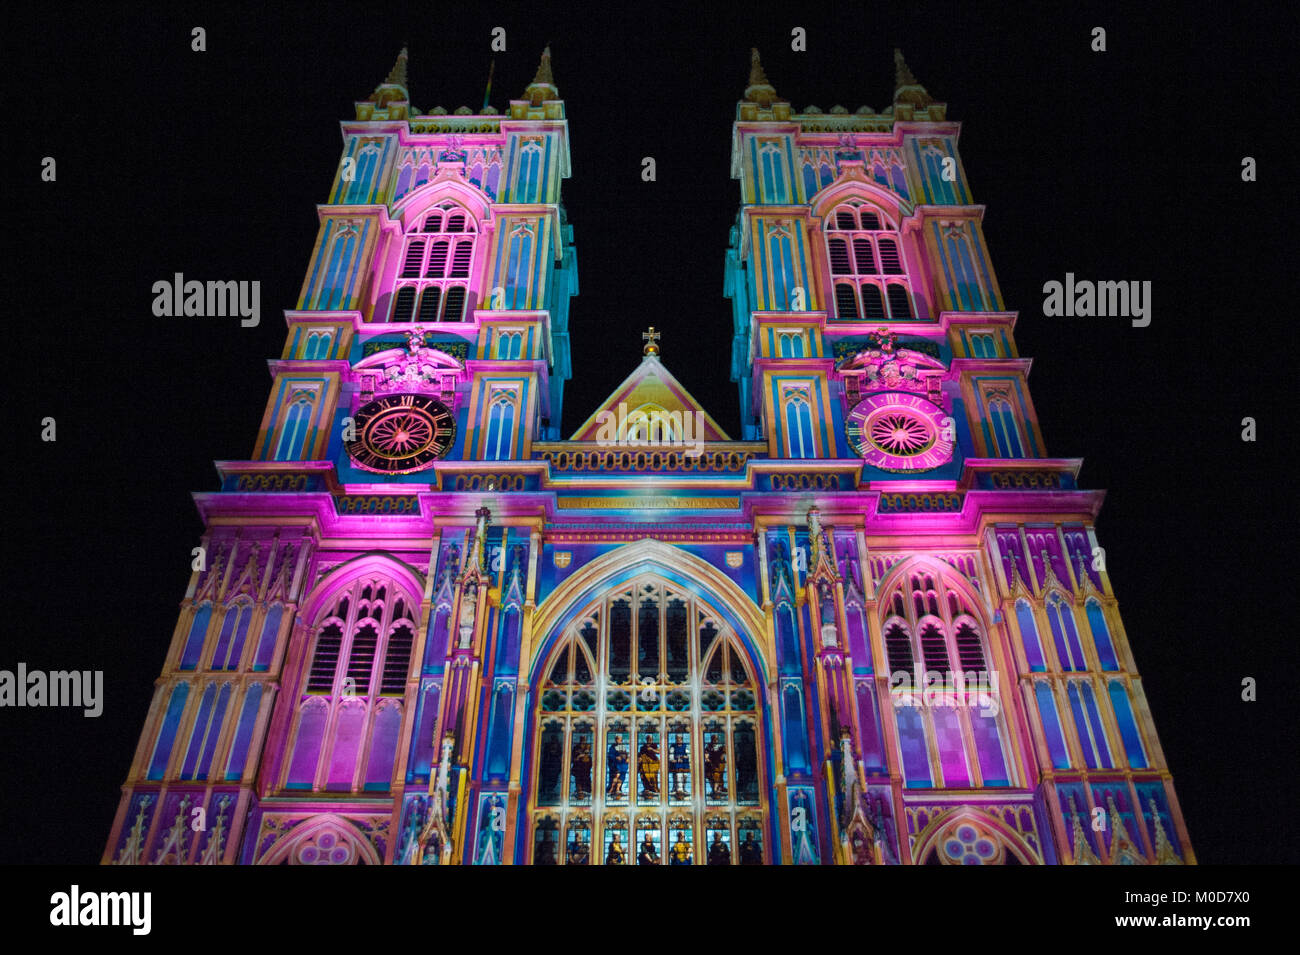 Lumiere London 2018. Light of the Spirit Chapter 2, created by Patrice Warrener, projected at Westminster Abbey. The city-wide light festival organised by The Mayor of London and Artichoke is expected to draw up to 1.25 million visitors over its four-day run 18th-21st January in London, UK. 20th January 2018. Credit: Antony Nettle/Alamy Live News Stock Photo